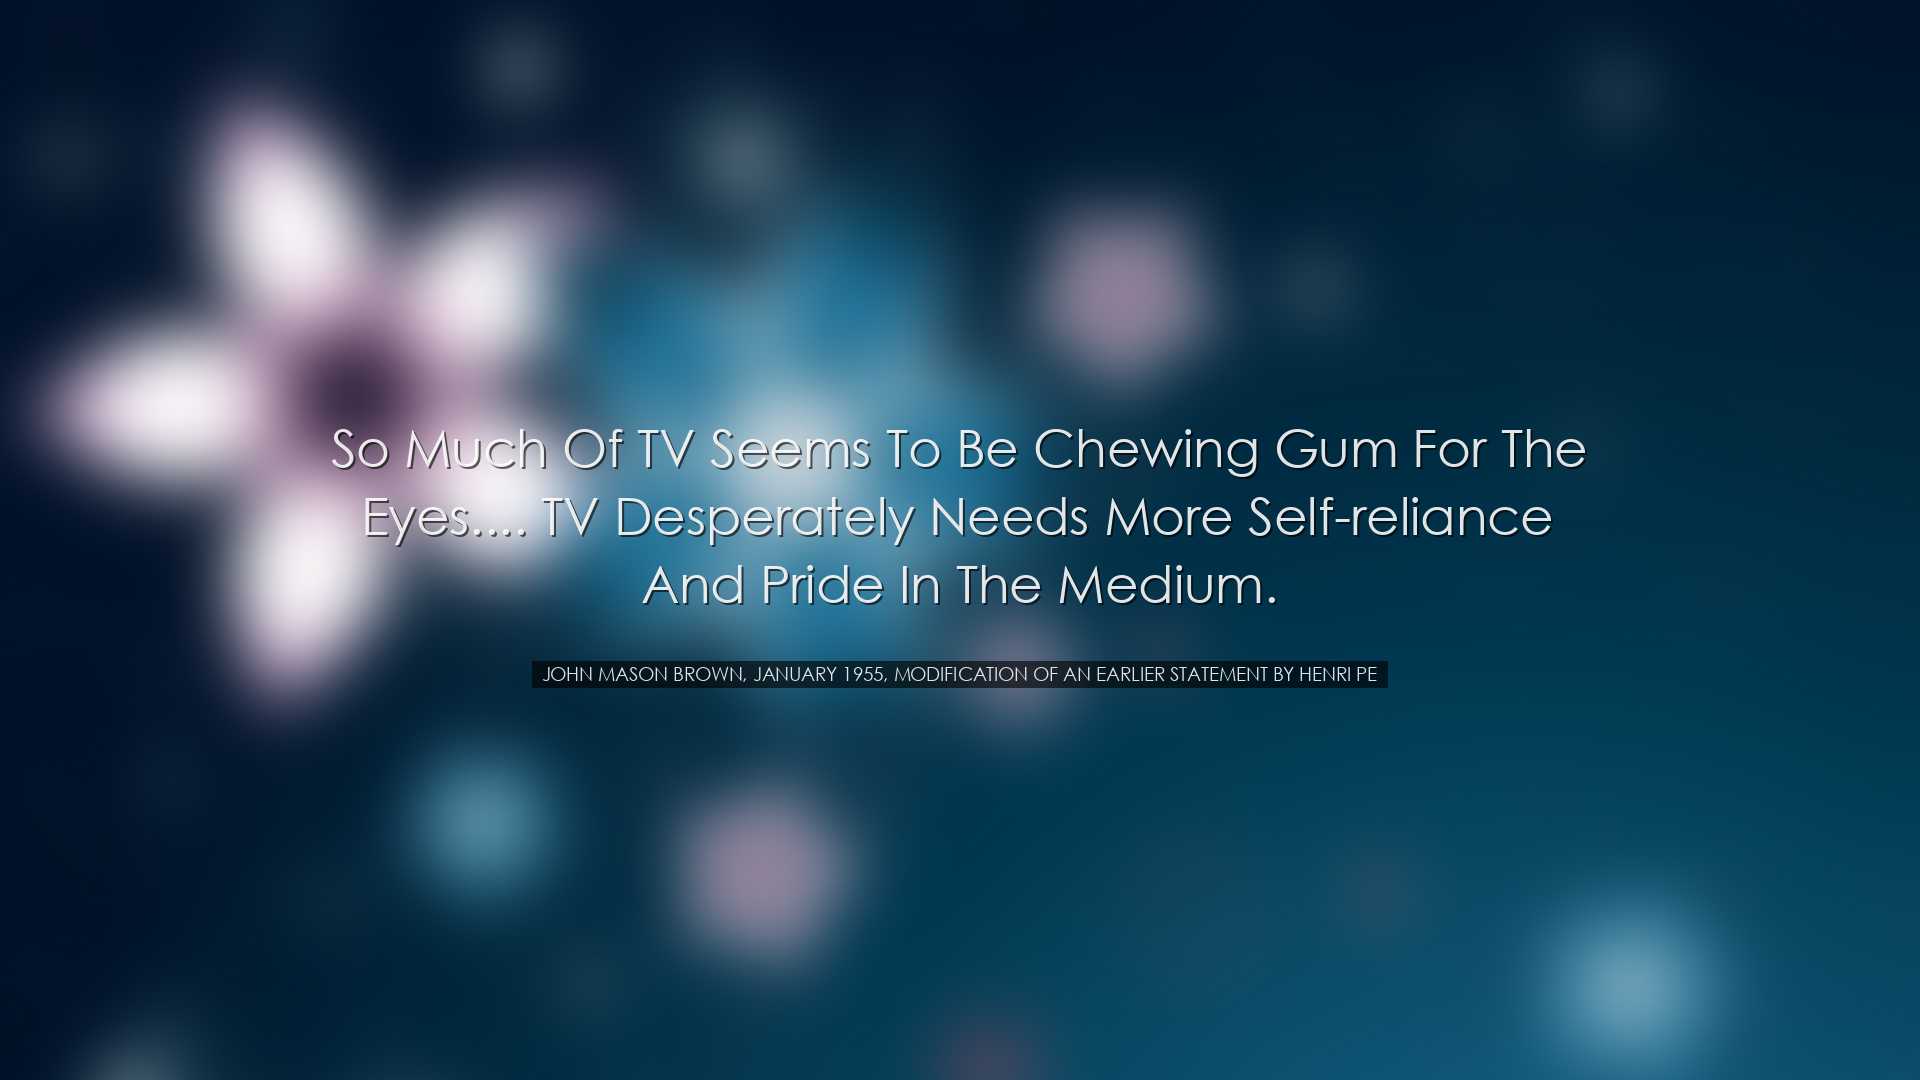 So much of TV seems to be chewing gum for the eyes.... TV desperat